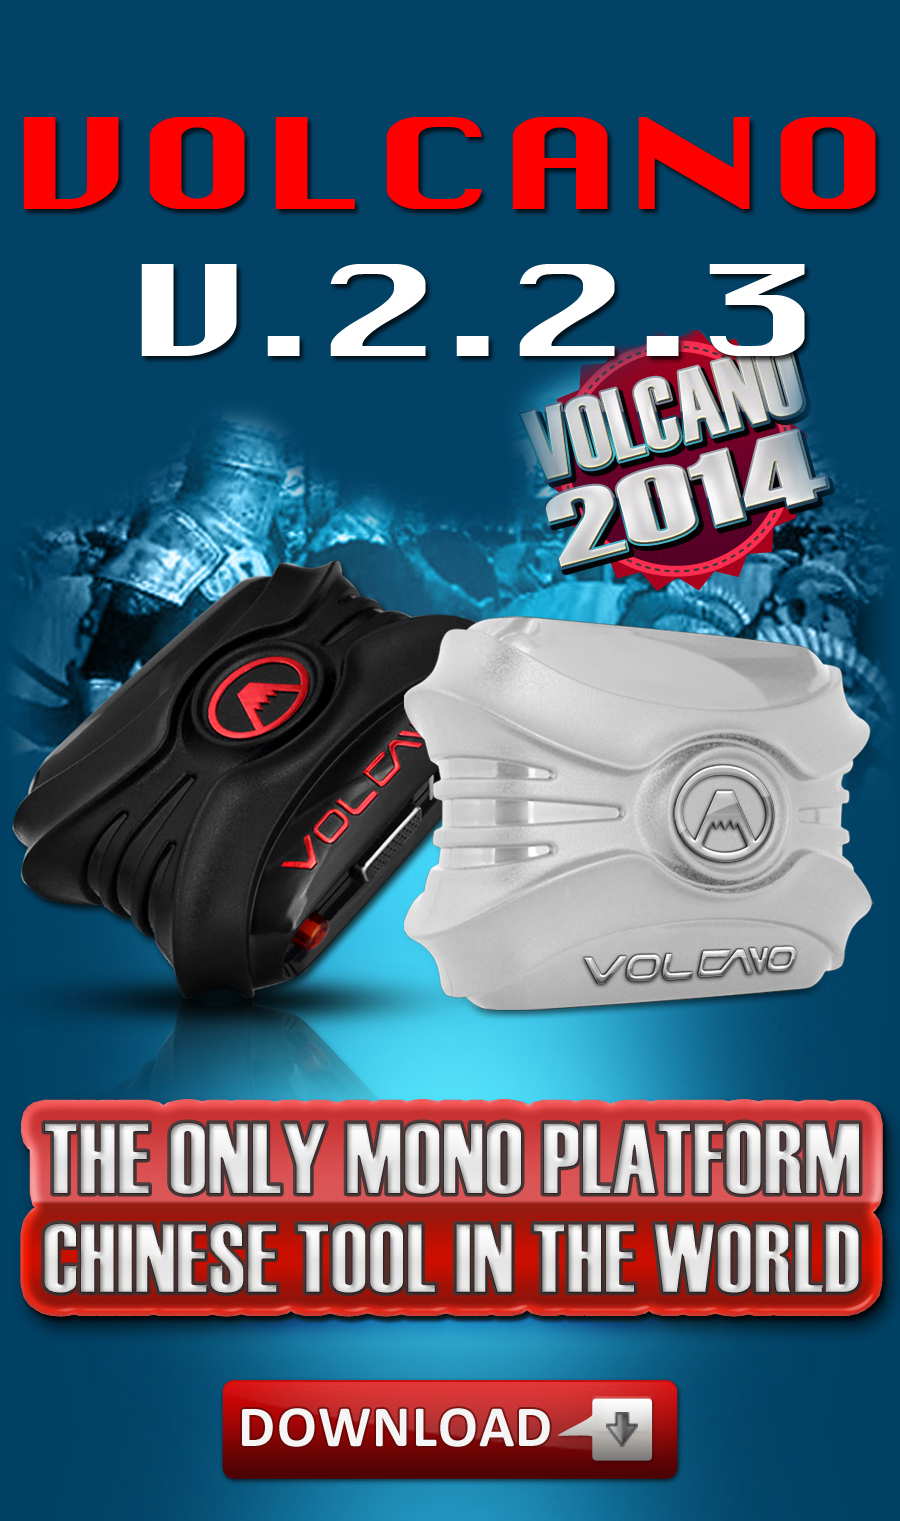 Volcano Box by Furious Team [Latest News and Updates]  - Page 2 2.2.3